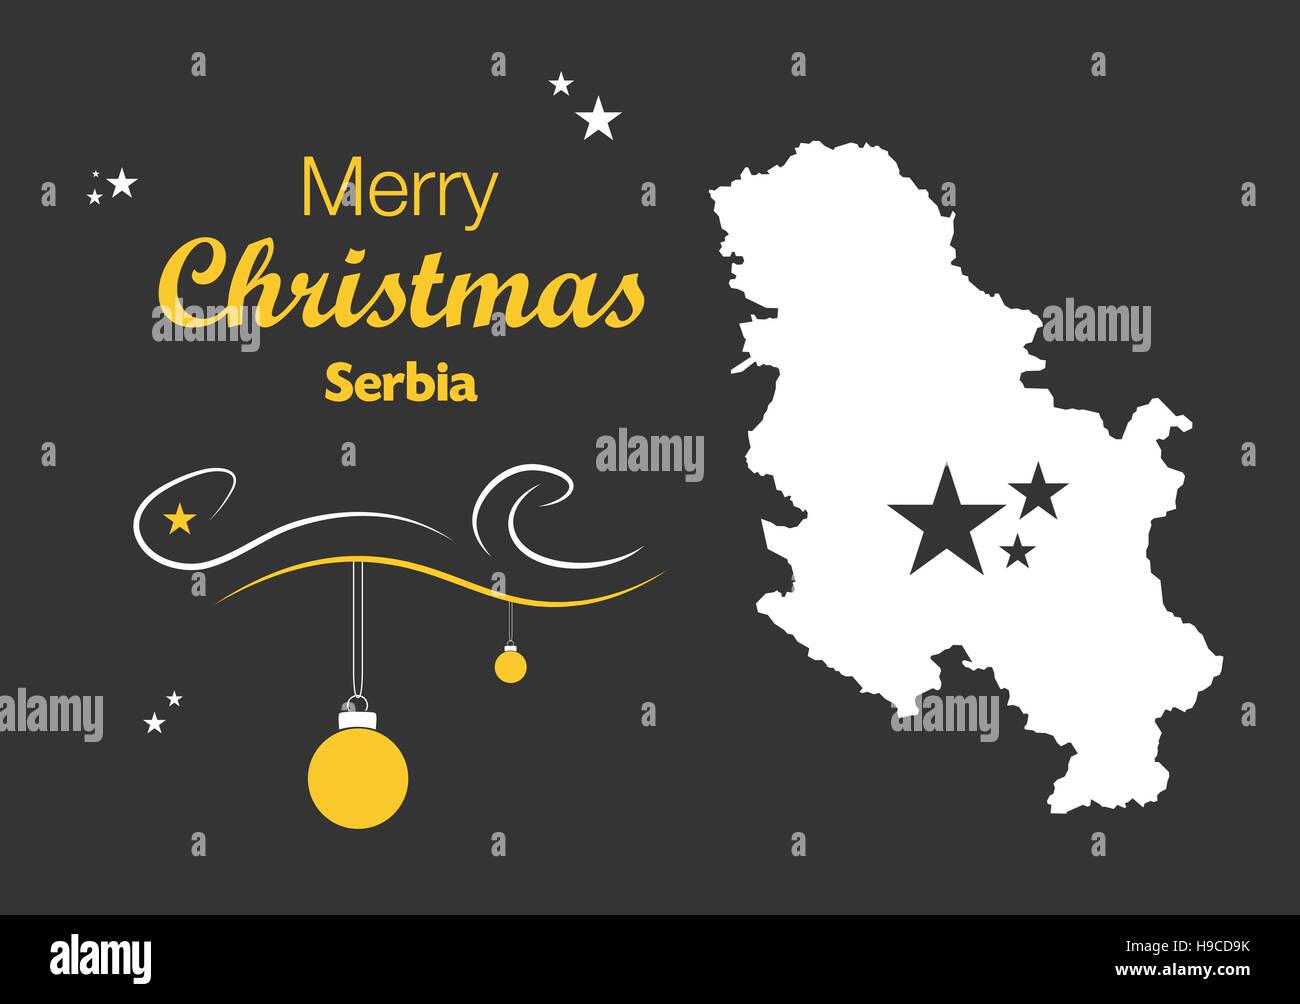 Merry Christmas illustration theme with map of Serbia Stock Vector